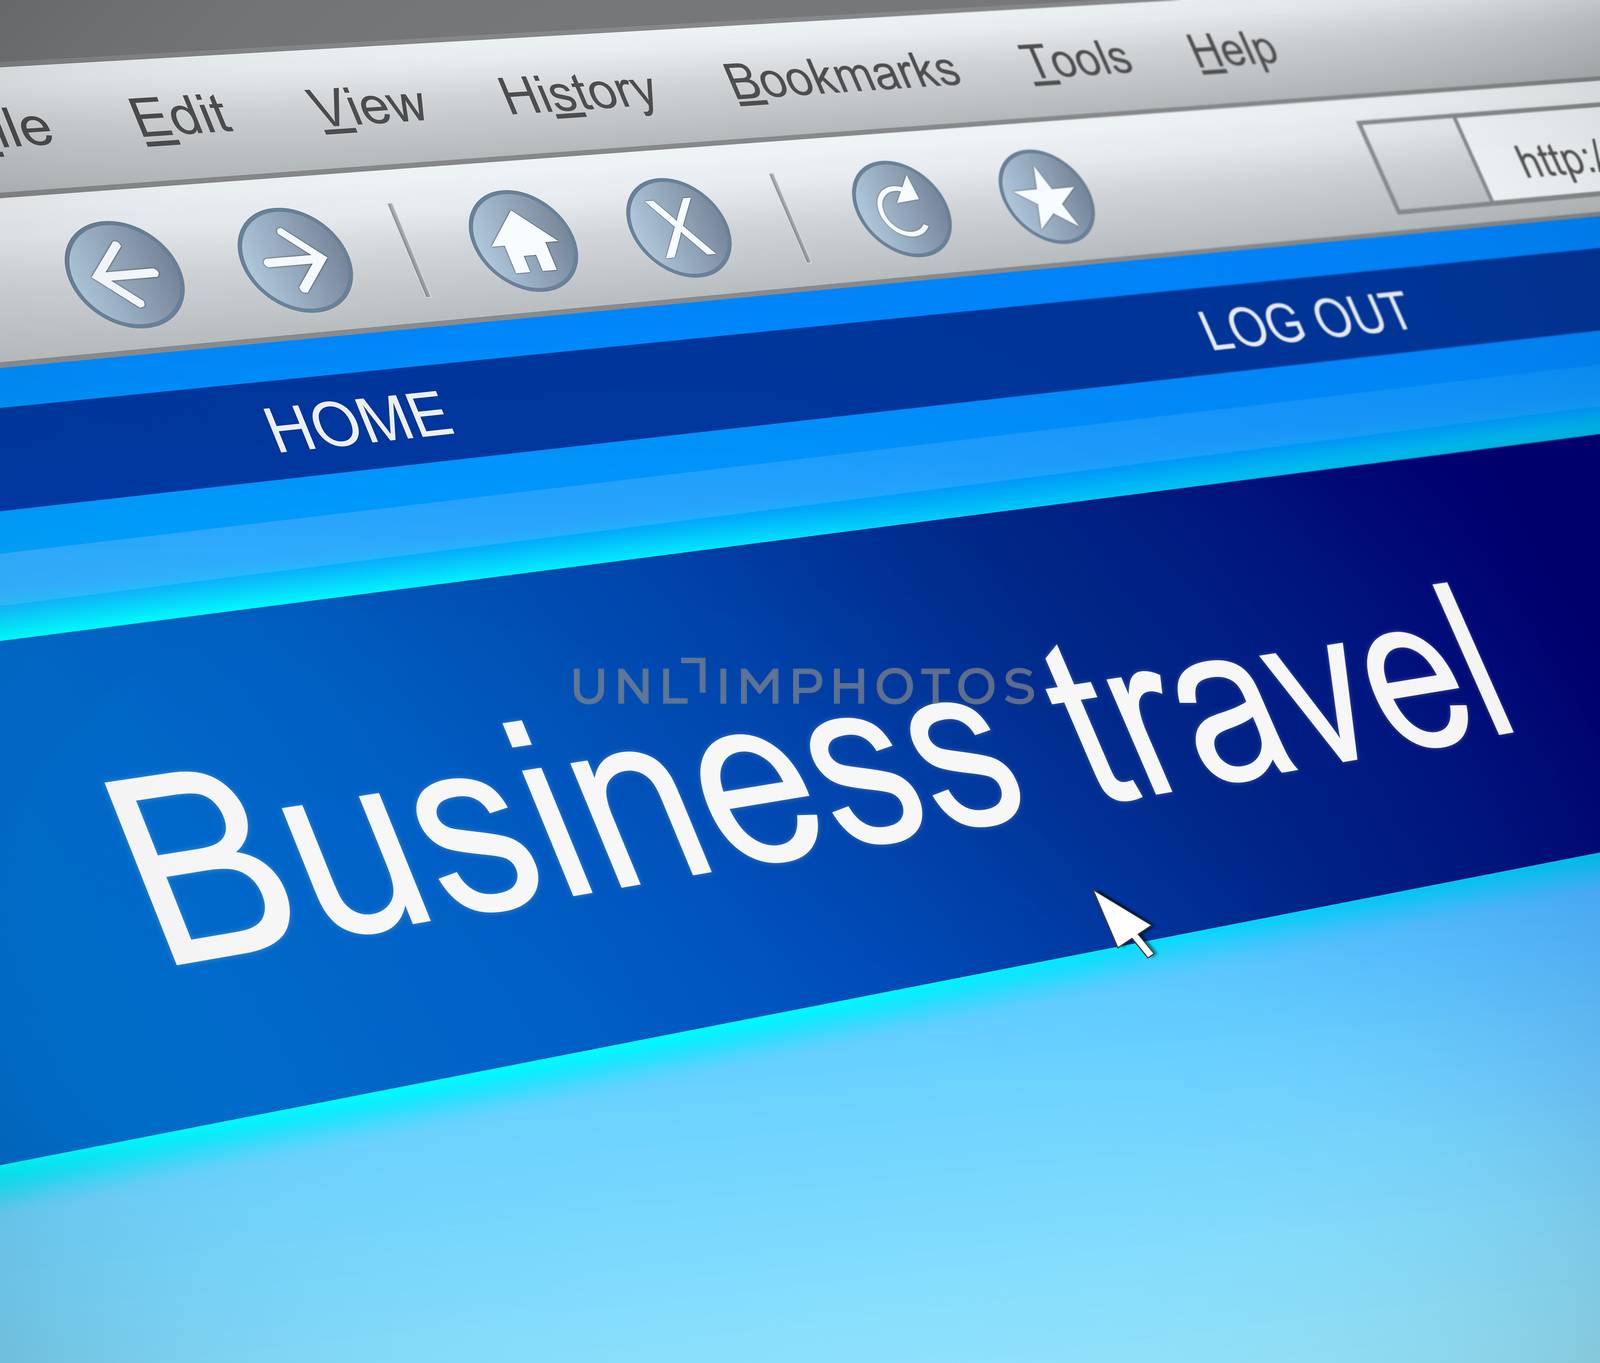 Illustration depicting a computer screen capture with a business travel concept.